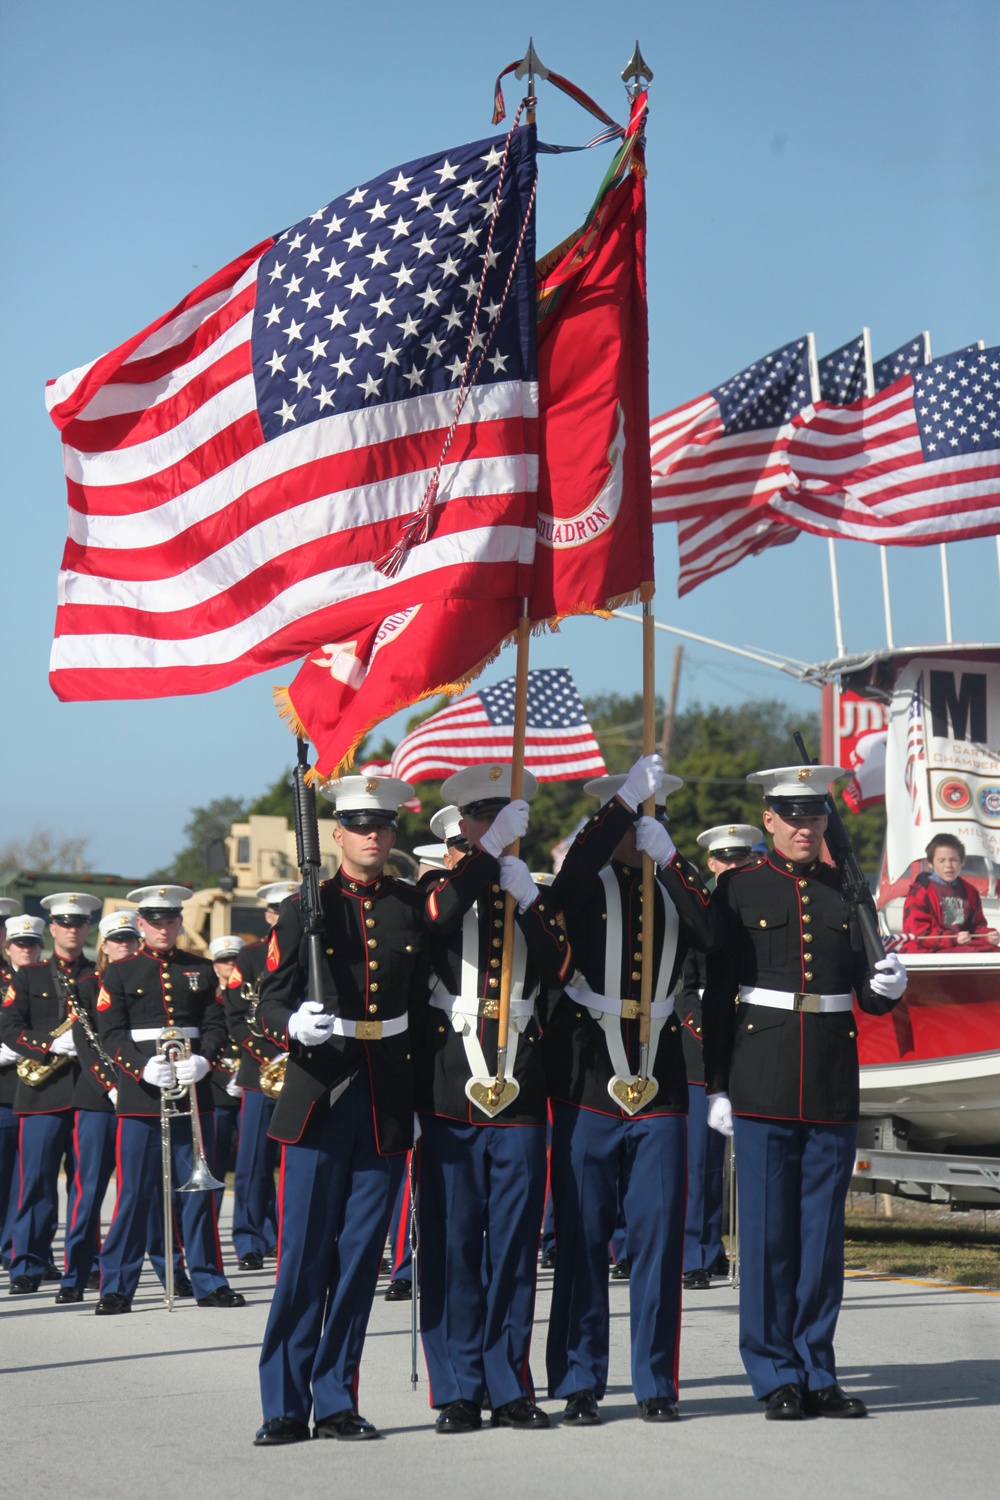 Saluting America's veterans: Cherry Point Marines participate in parade honoring nation’s warriors